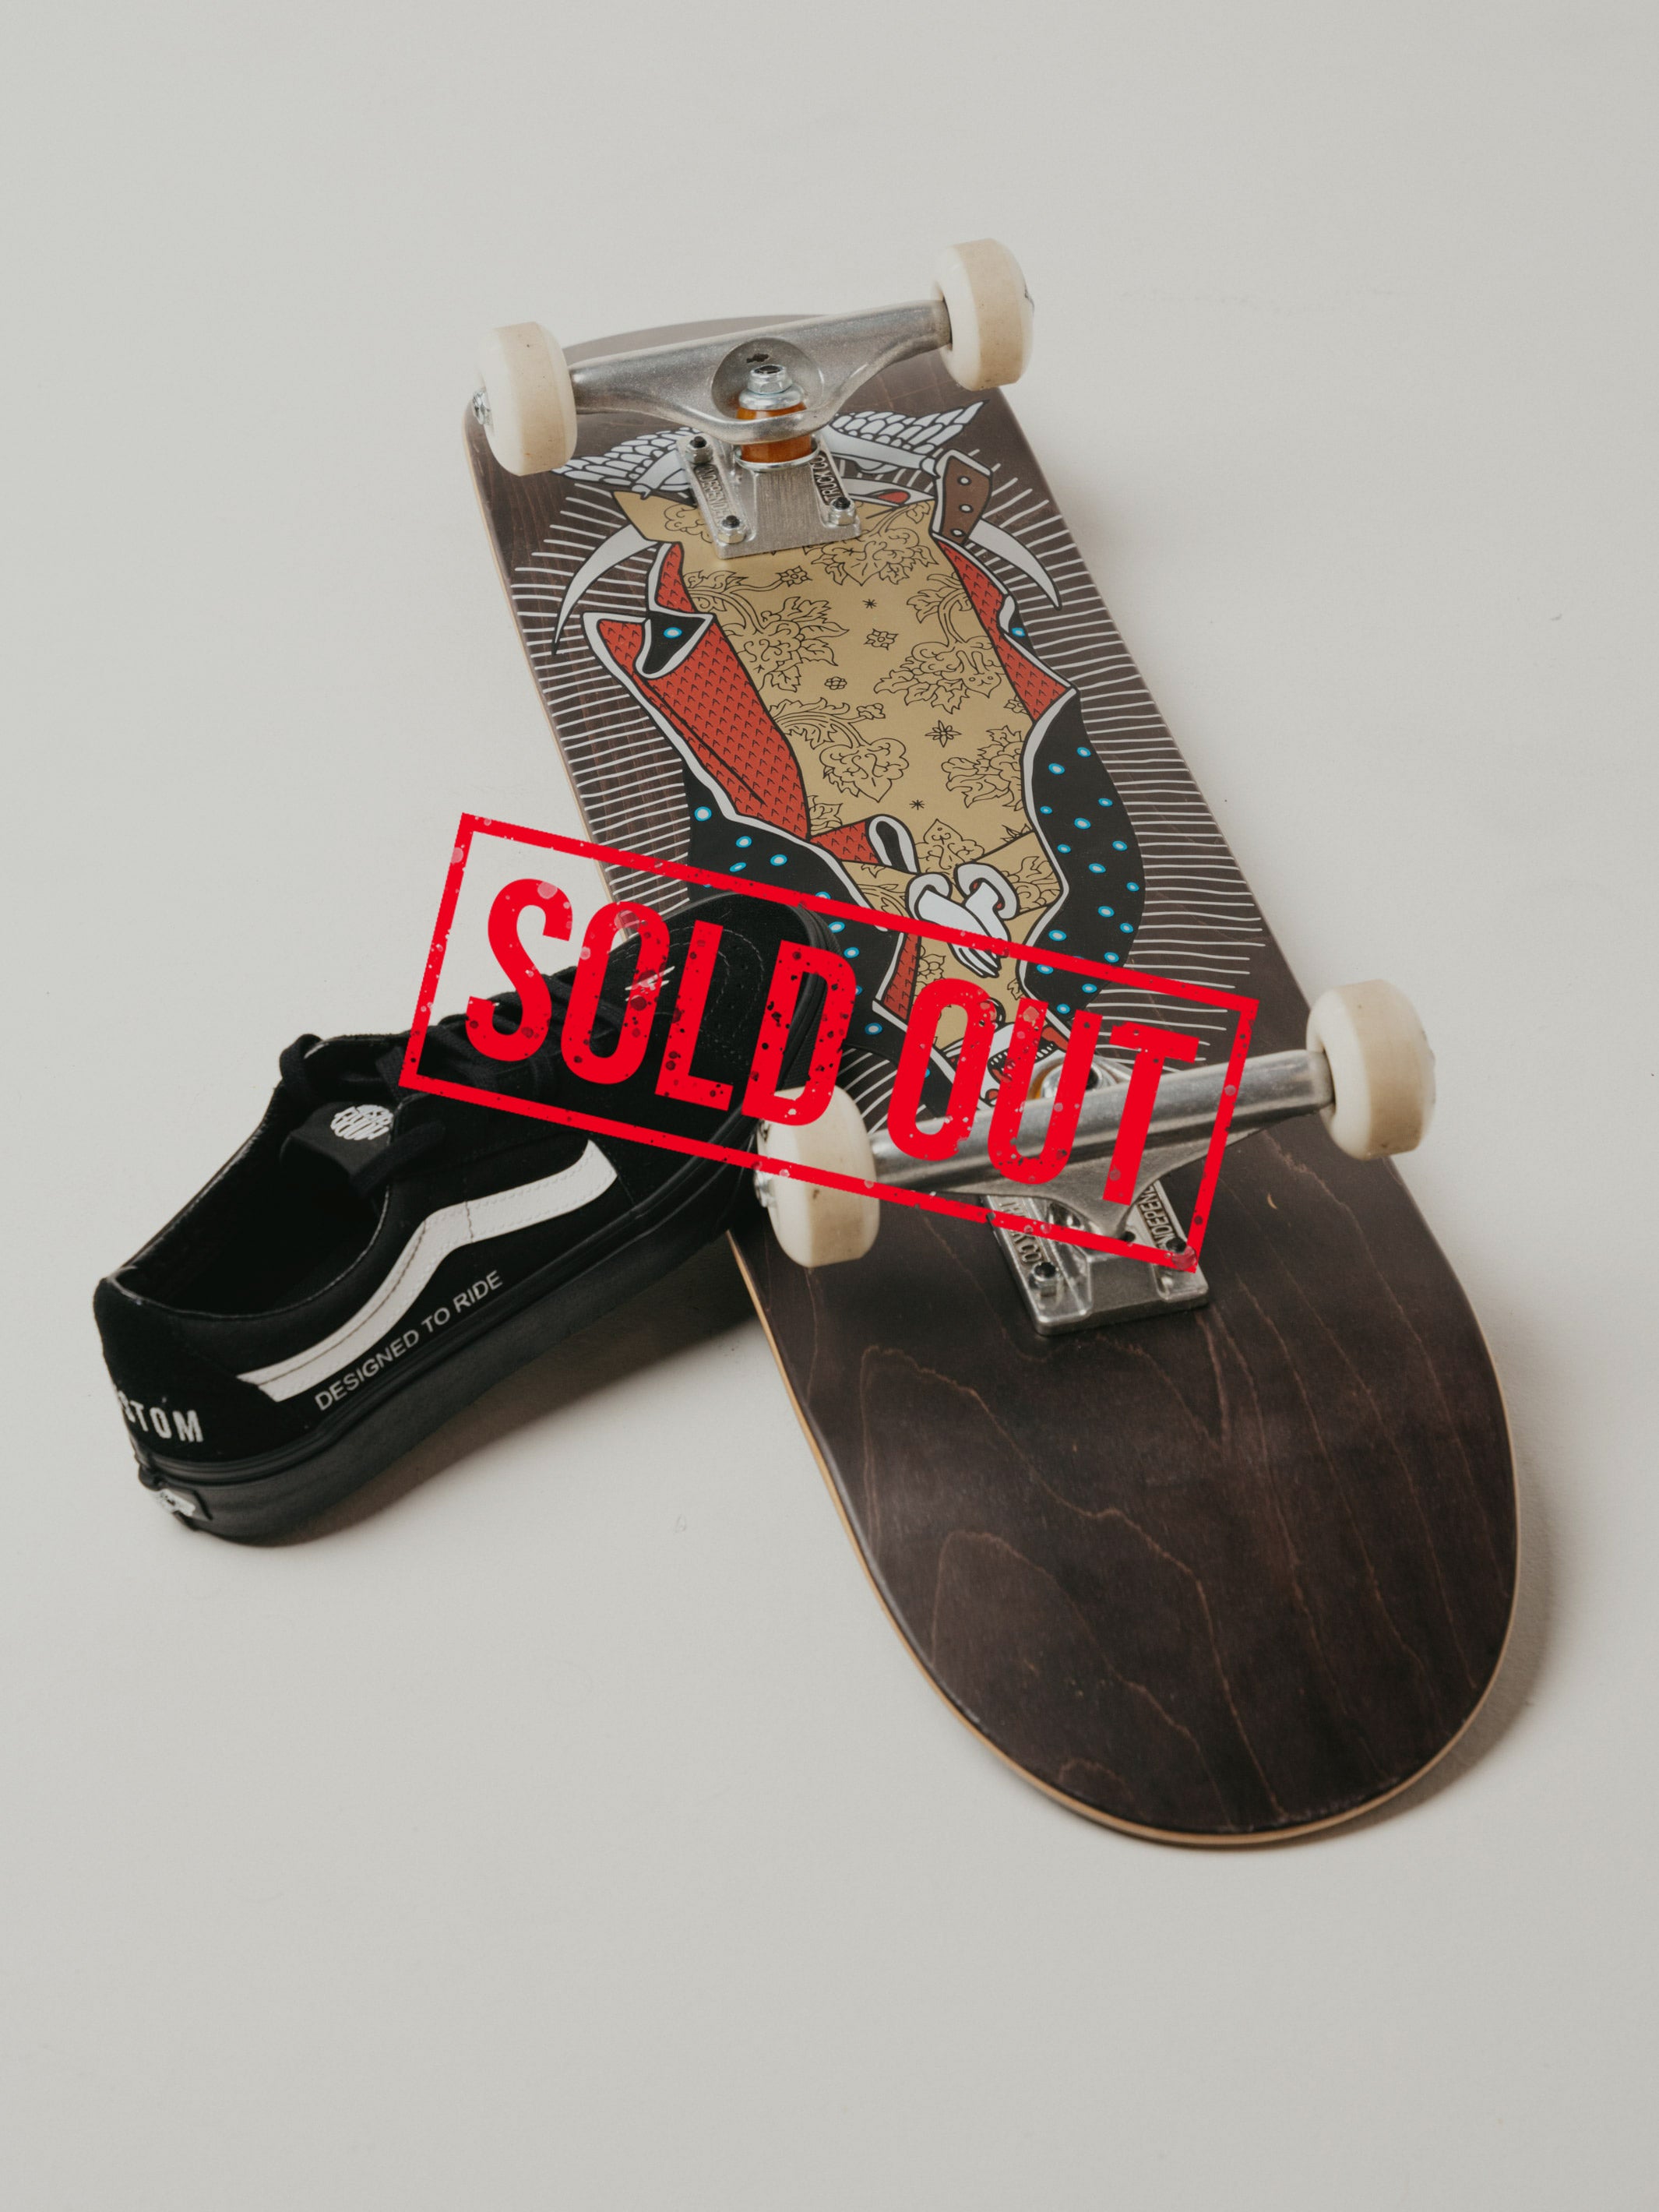 Vans power supply sold out